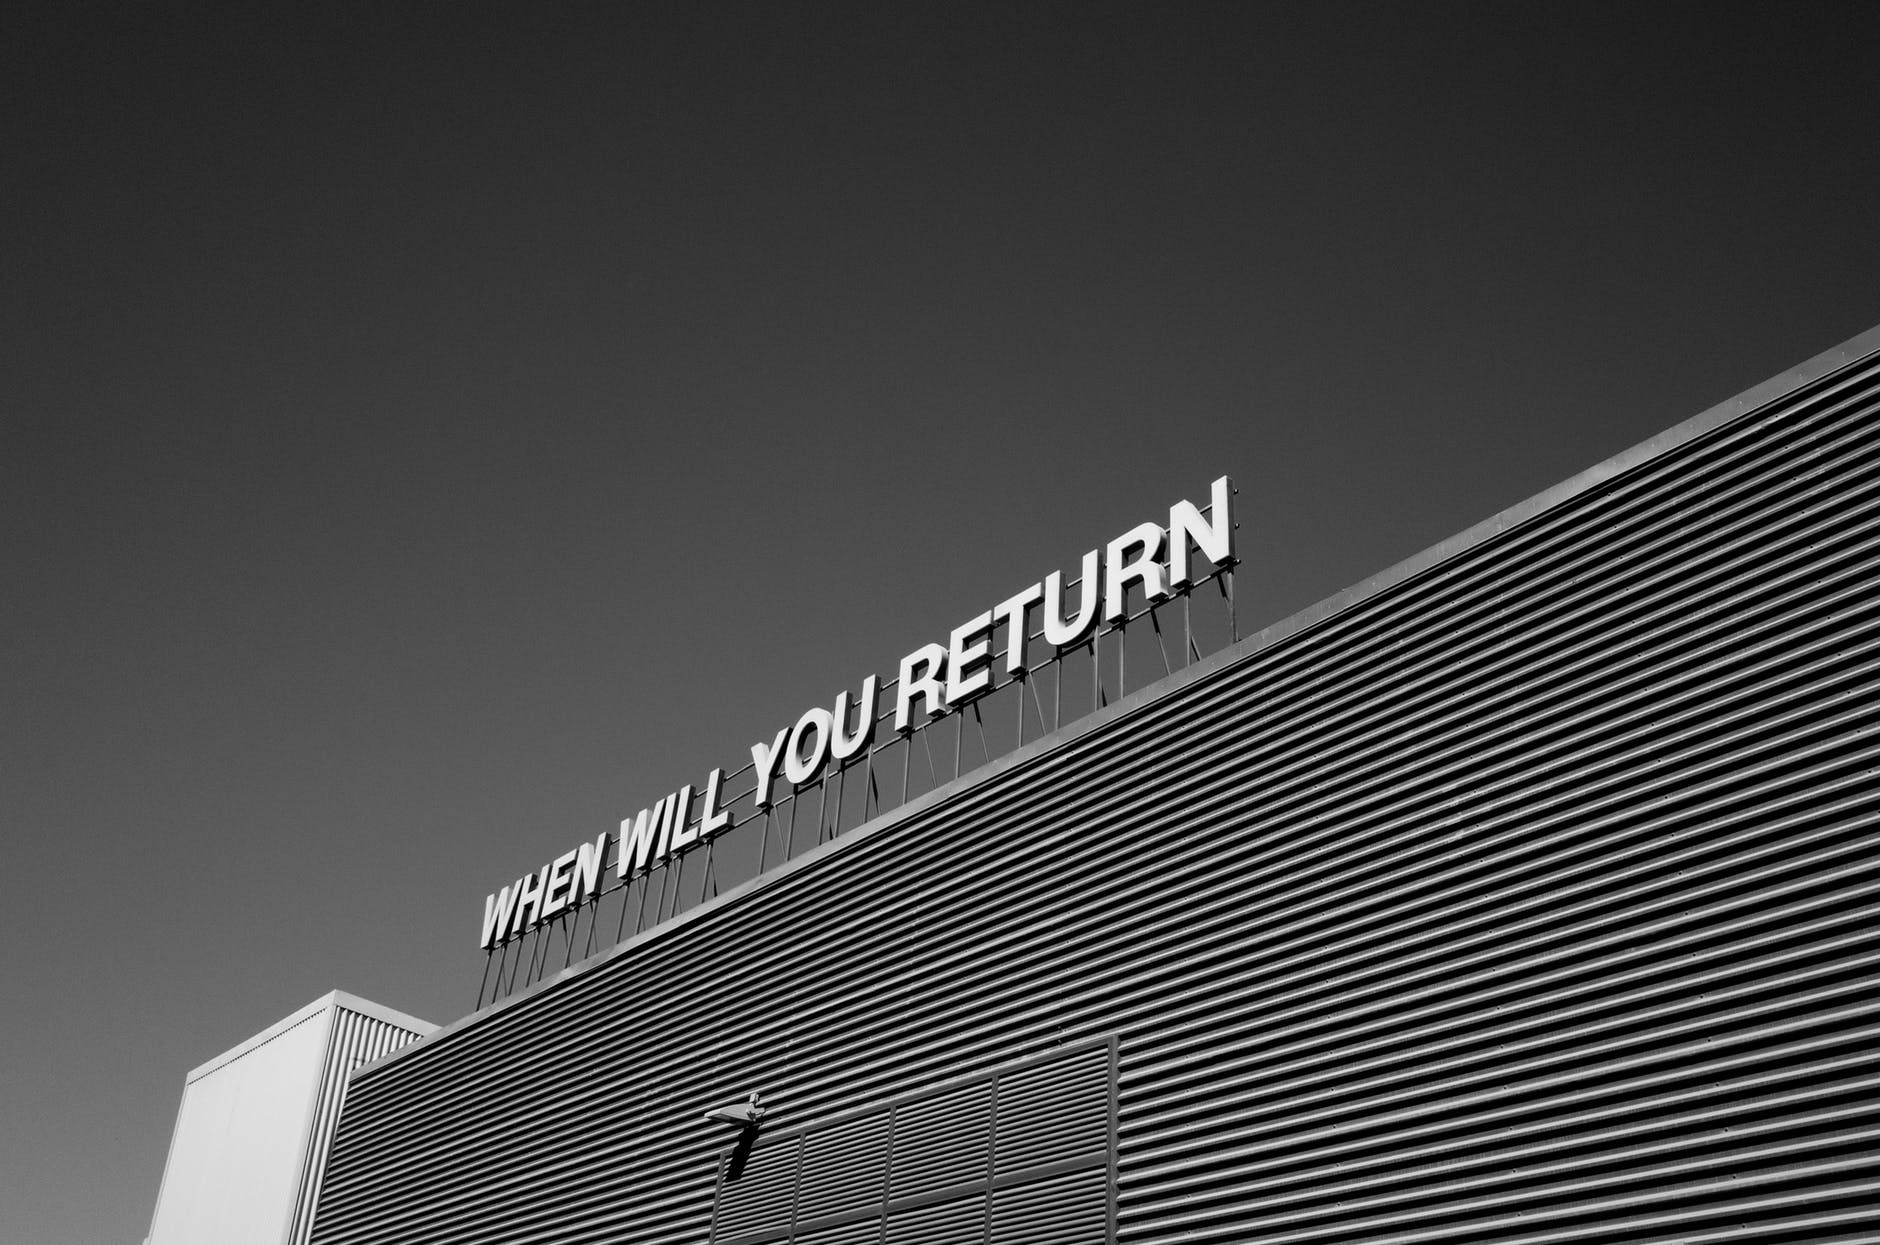 A sign on a roof saying 'when will you return'